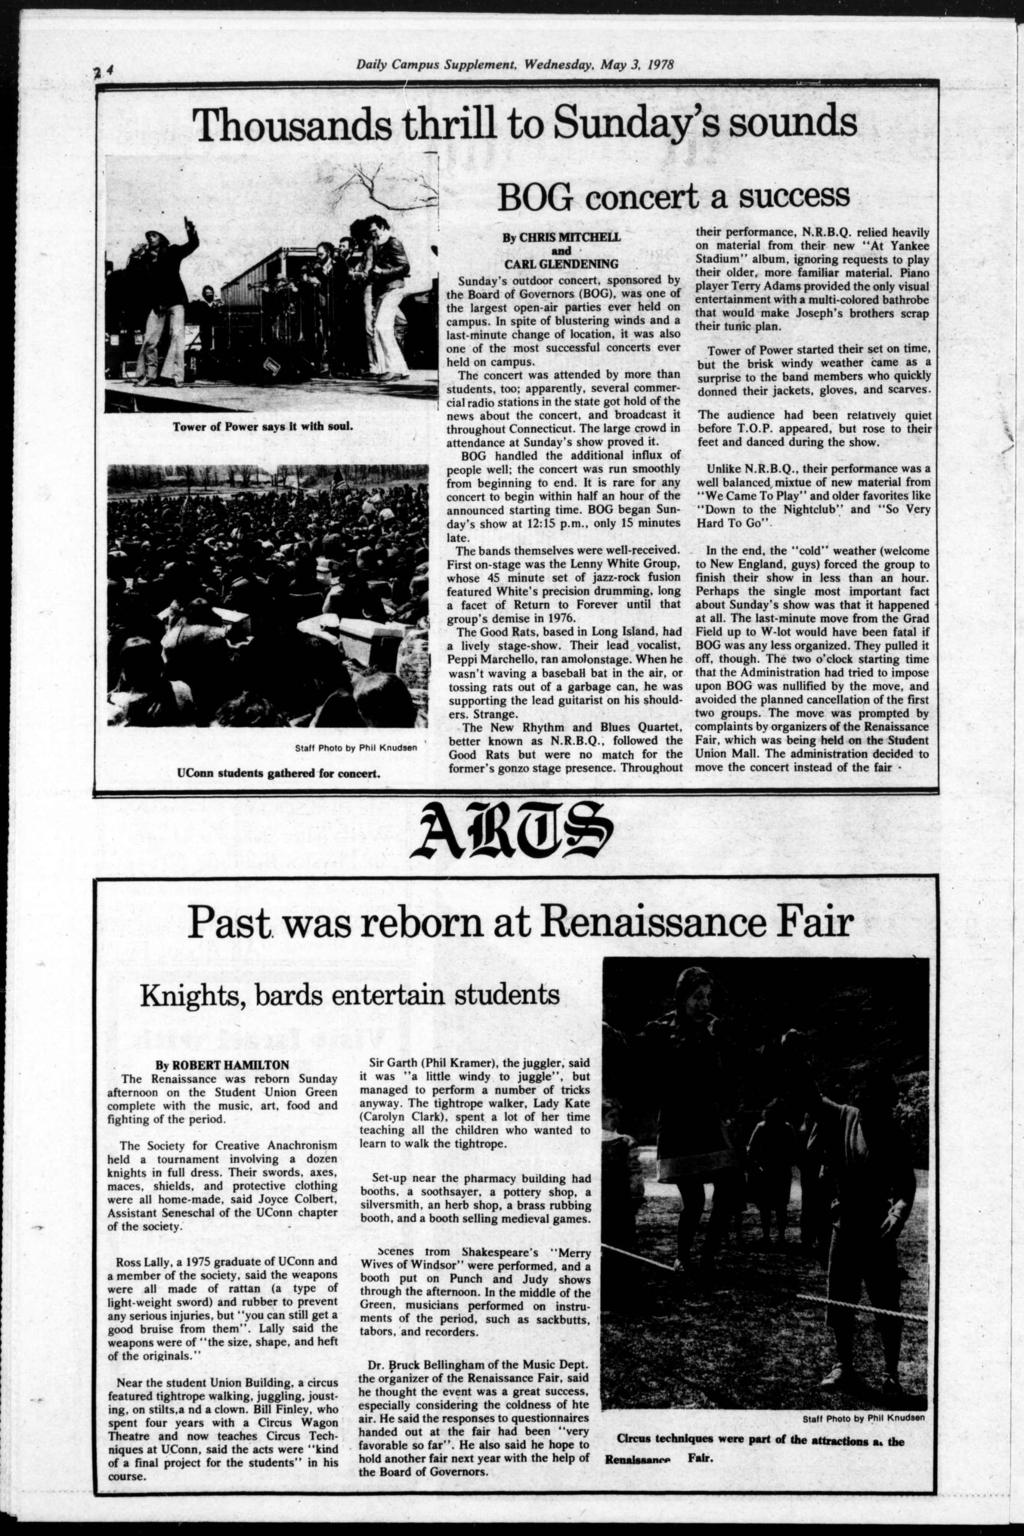 *< Daly Campus Supplement, Wednesday. May 3, 1978 Thousands thrll to Sunday's sounds m Tower of Power says t wth soul. 'Conn students gathered for concert.